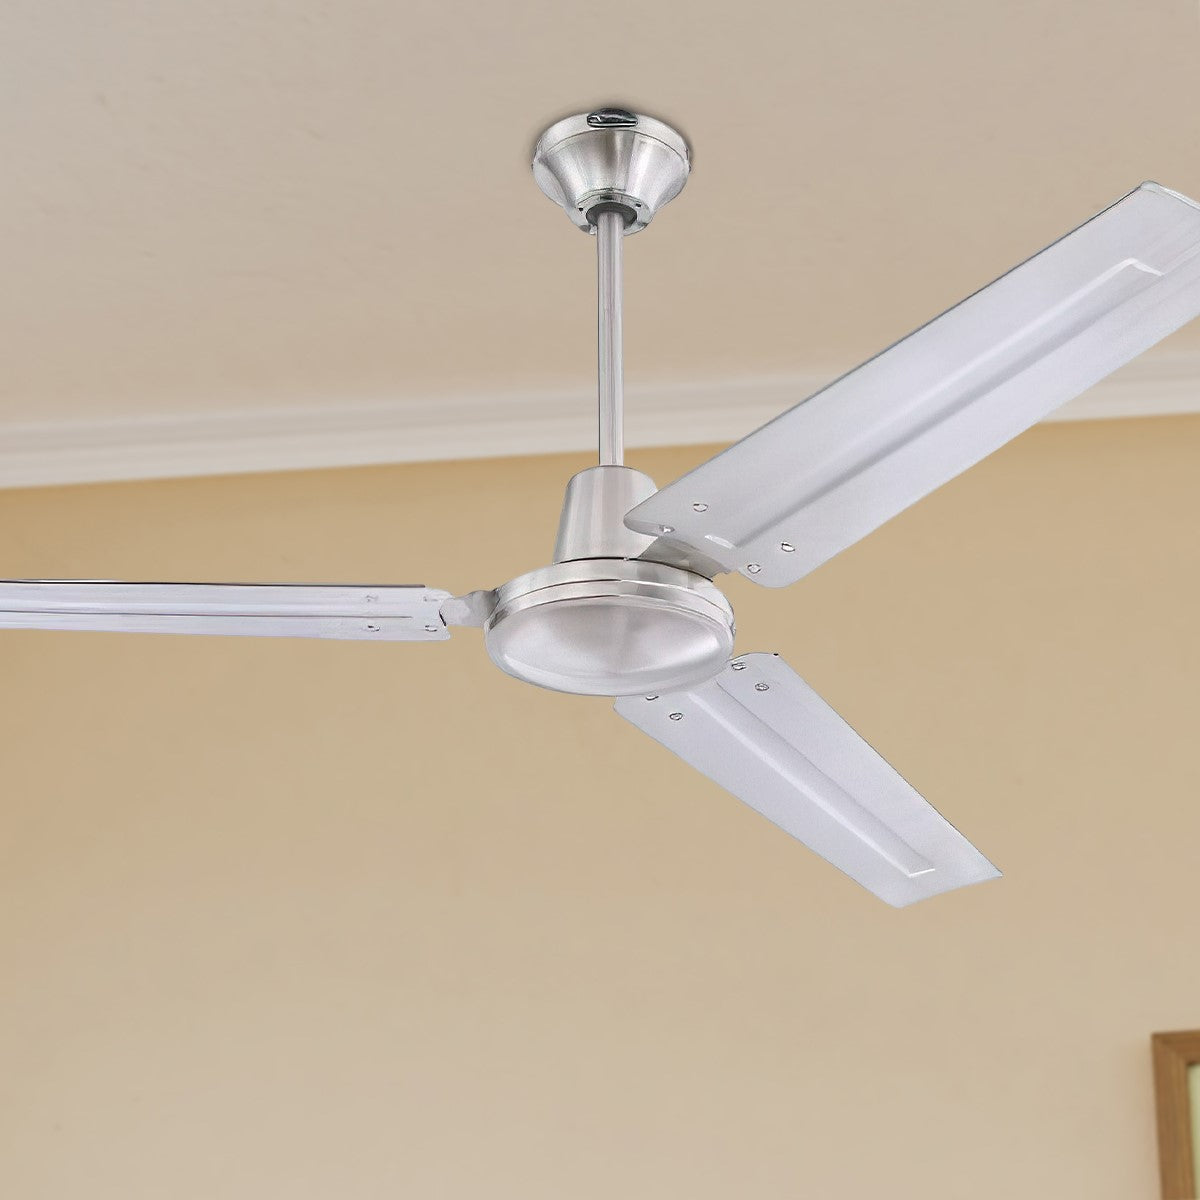 Jax 56 Inch Industrial Ceiling Fan, Brushed Nickel Finish, Wall Control Included